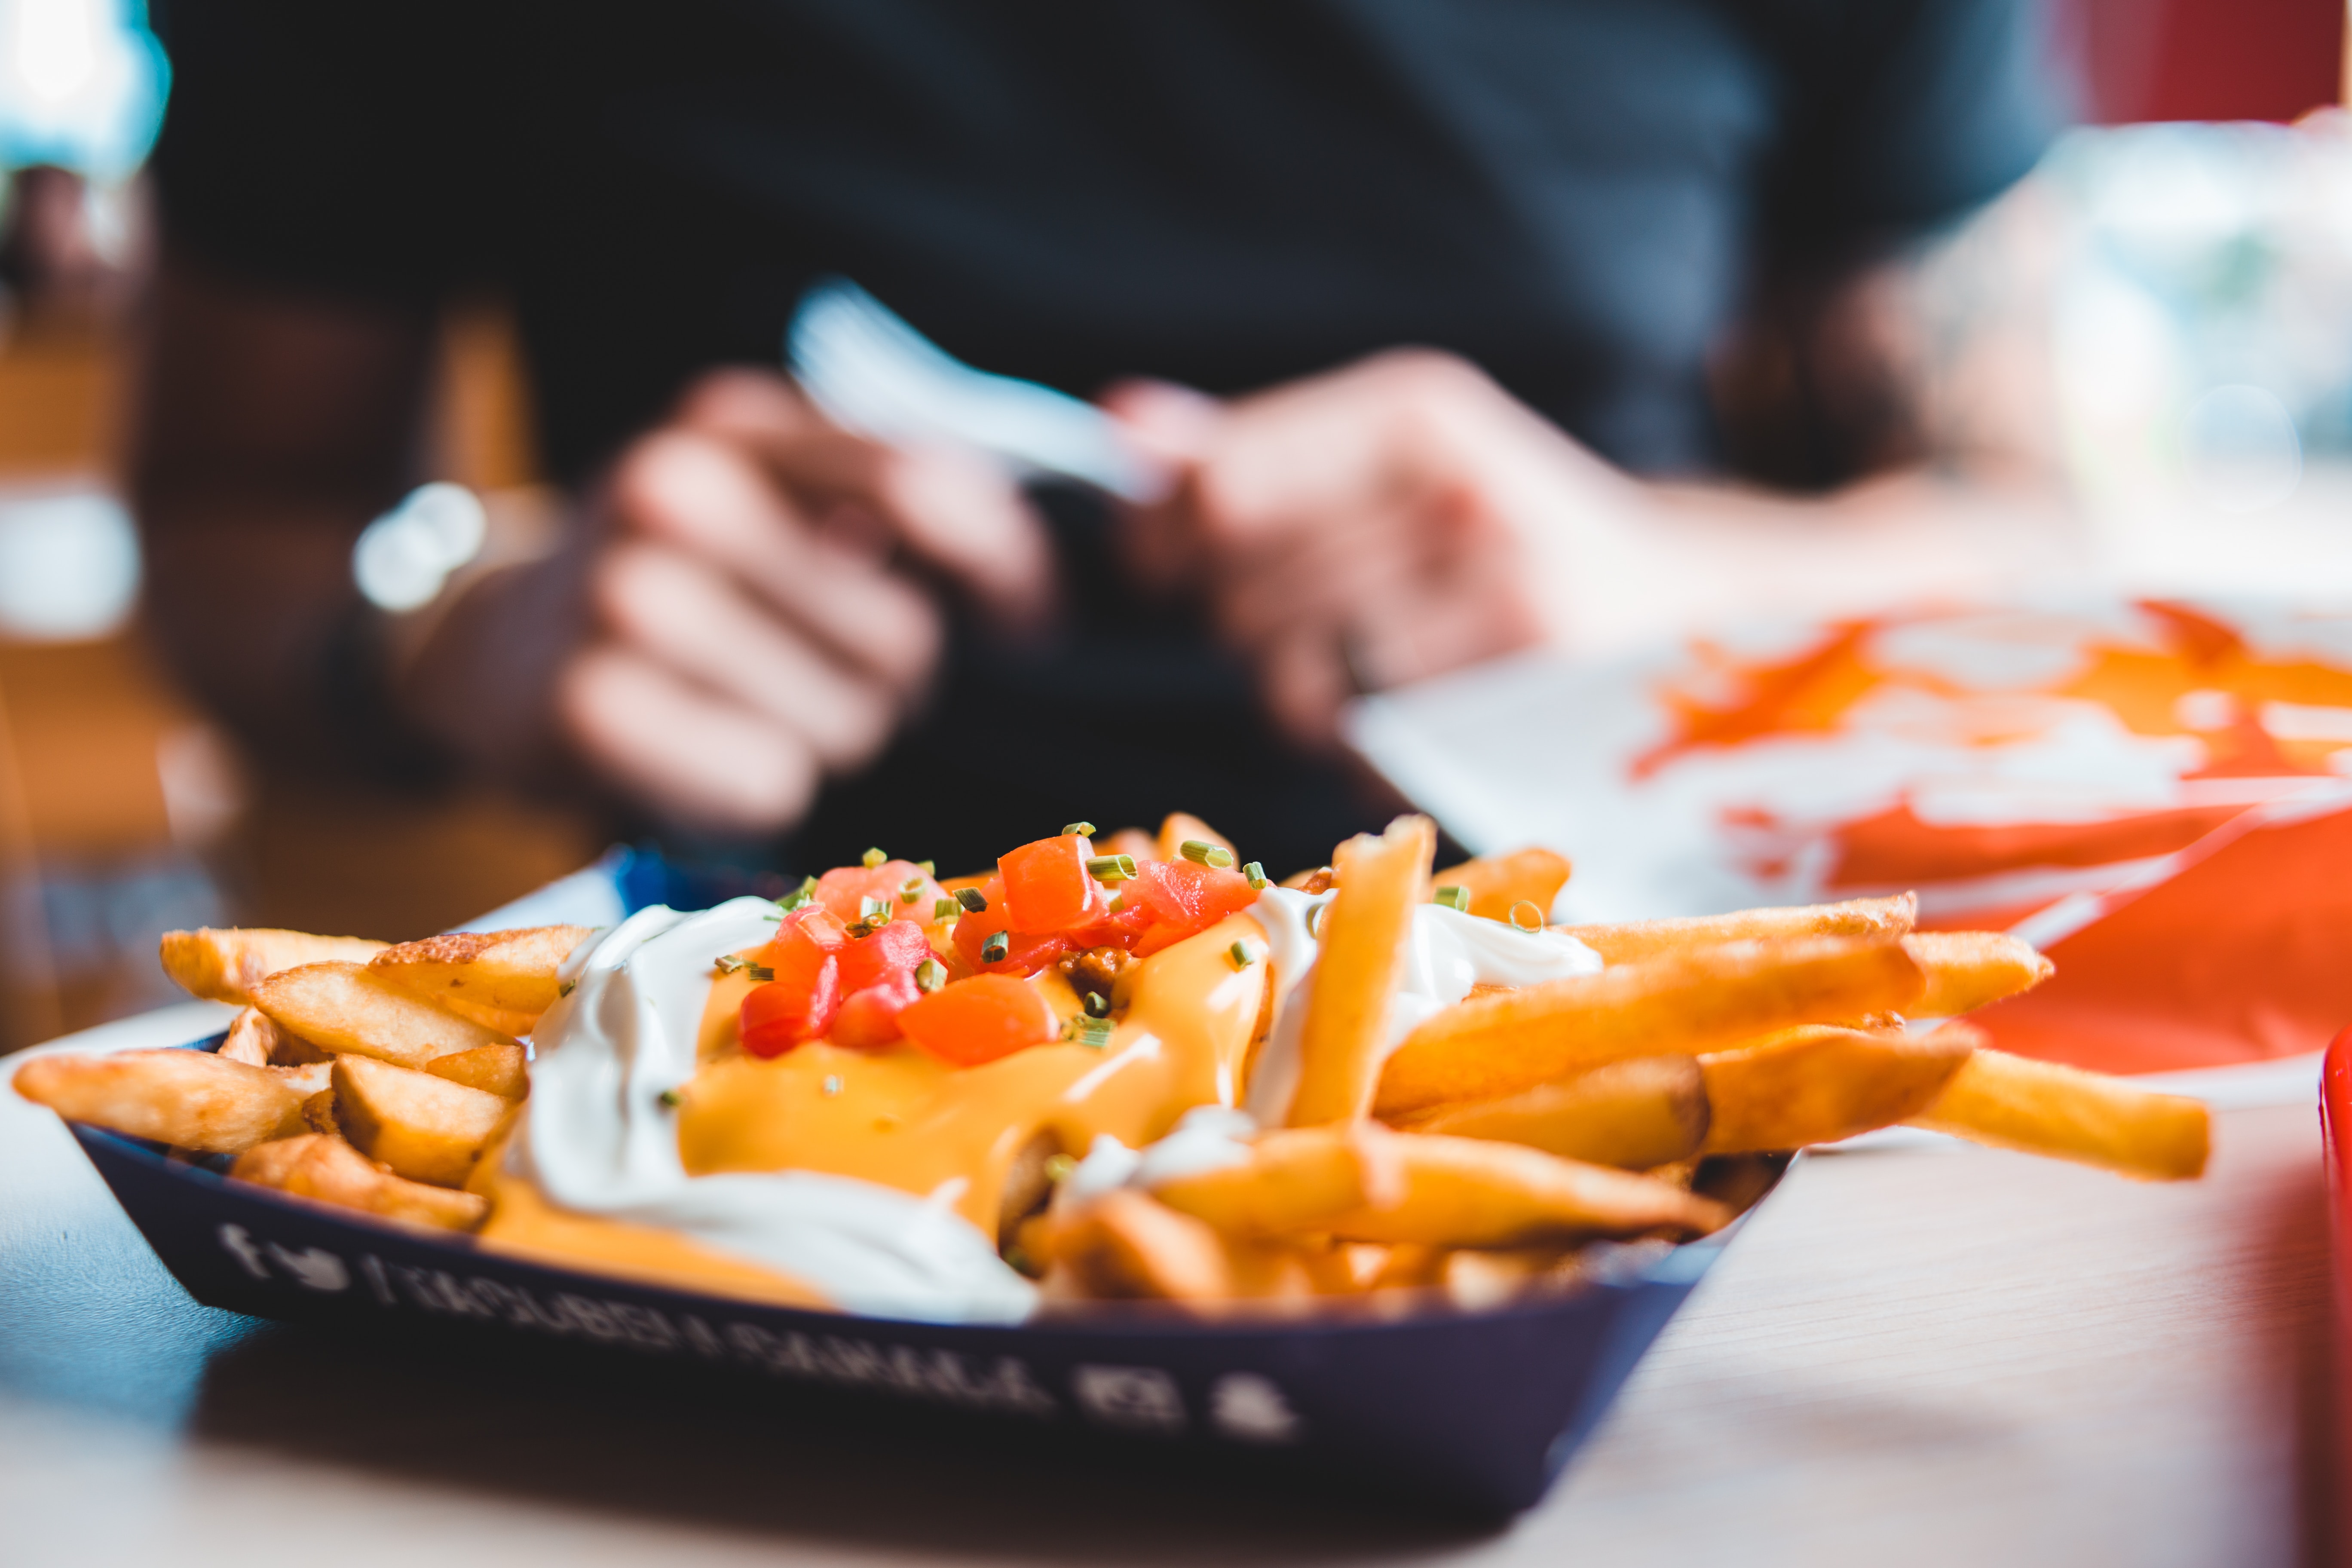 Where to Enjoy the Best Loaded Fries in Chicago